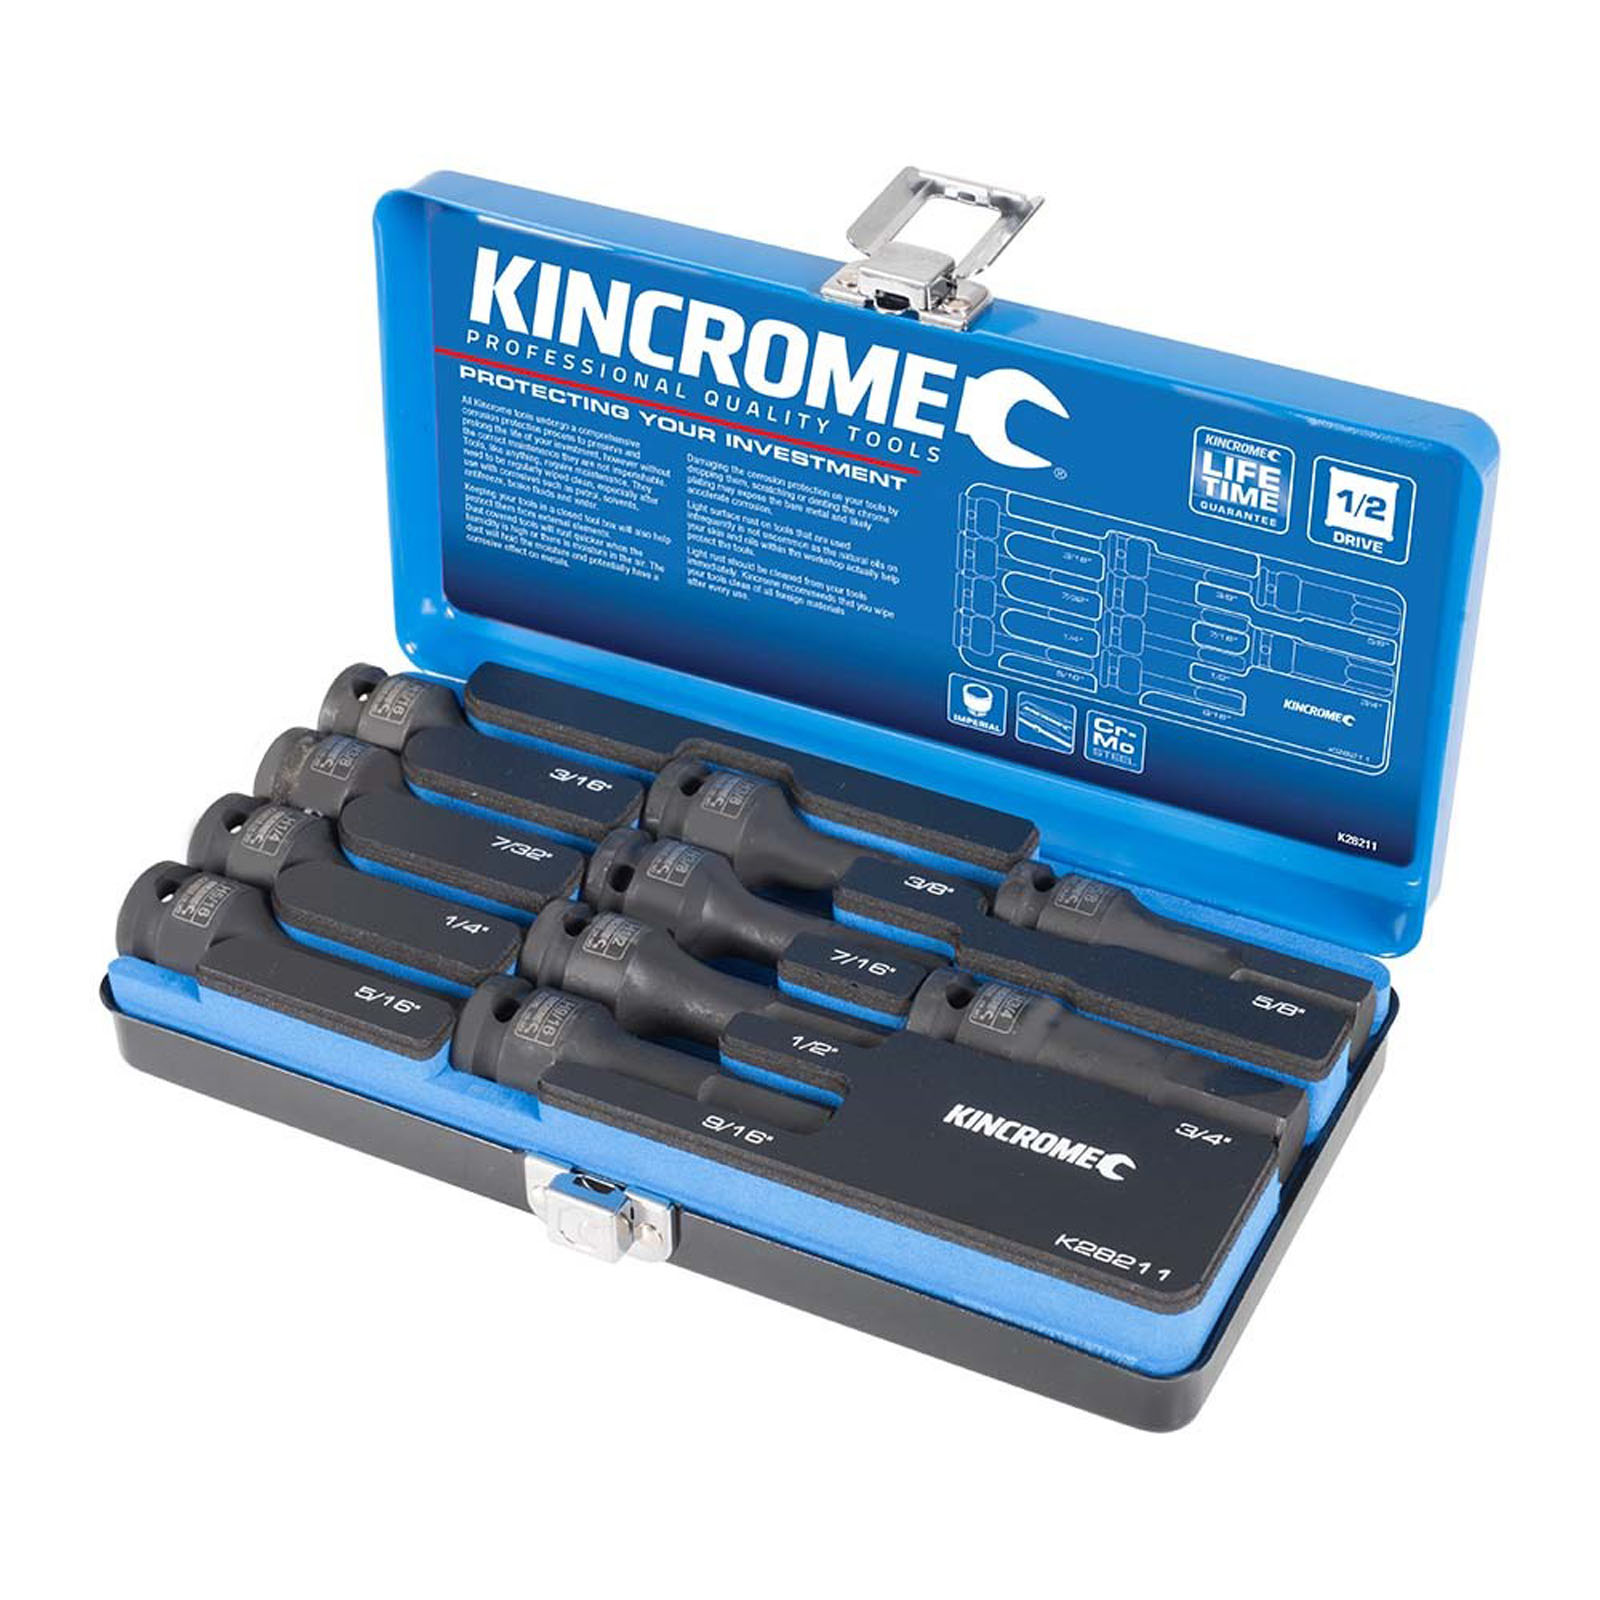 Hex Impact Socket Set 10 Piece 1/2 Drive - Imperial - Kincrome Tools -  Kincrome